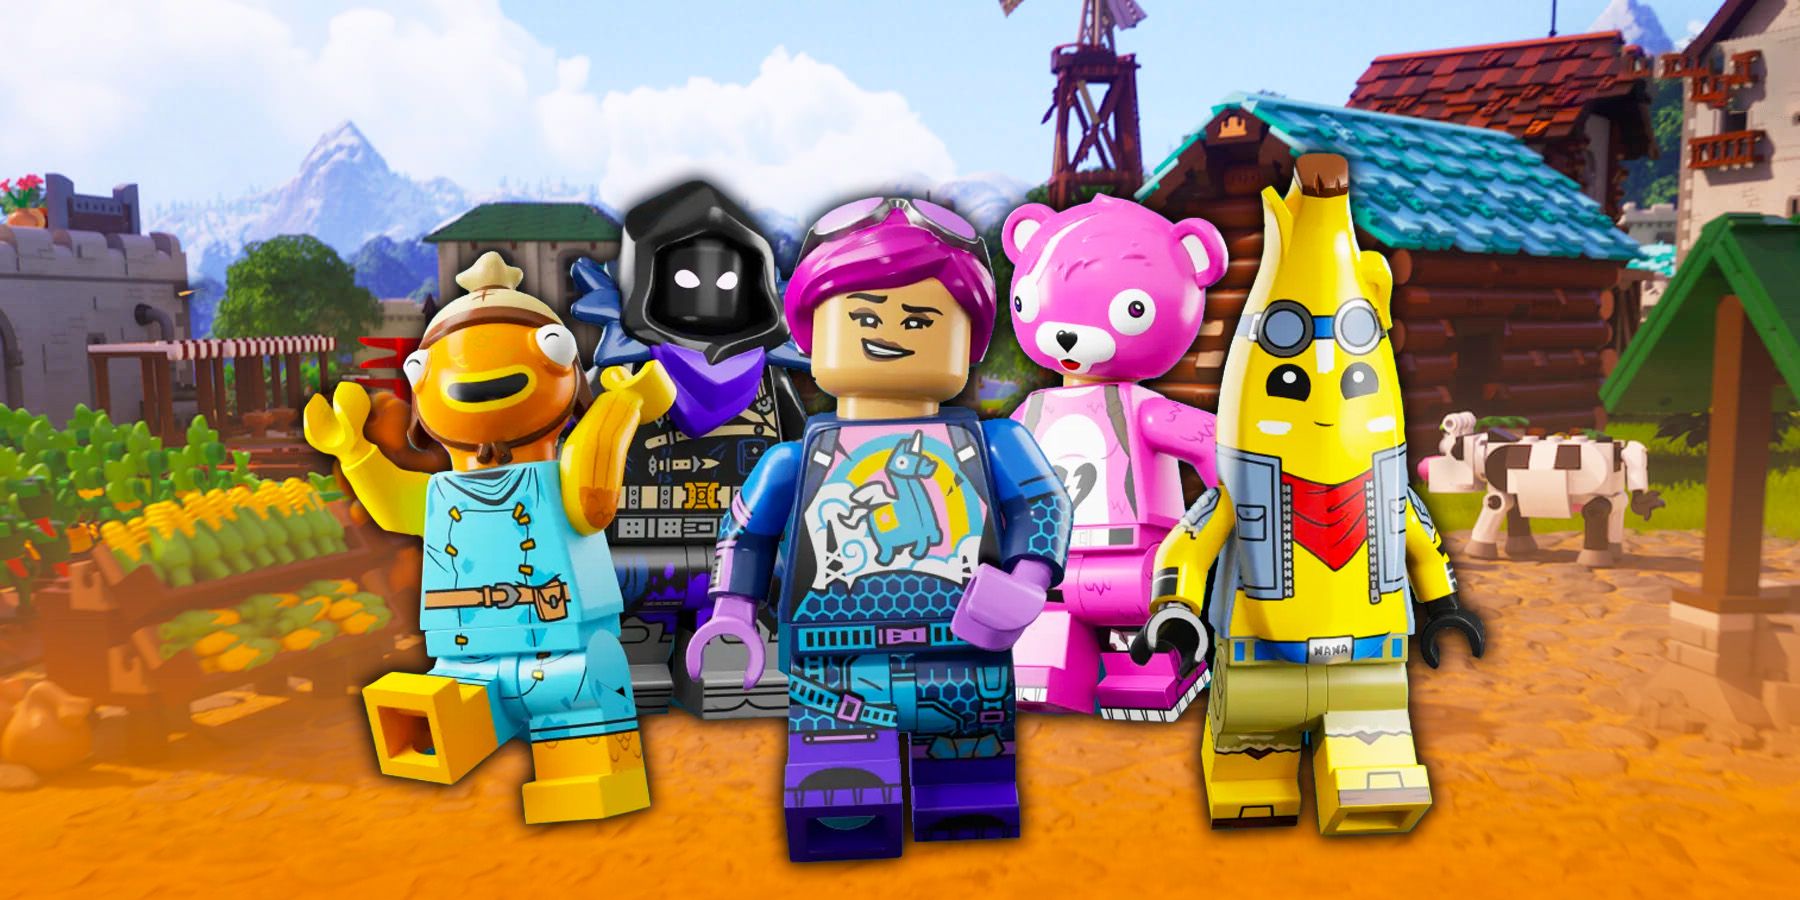 Five Villagers in various costumes in front of a village in Lego Fortnite.